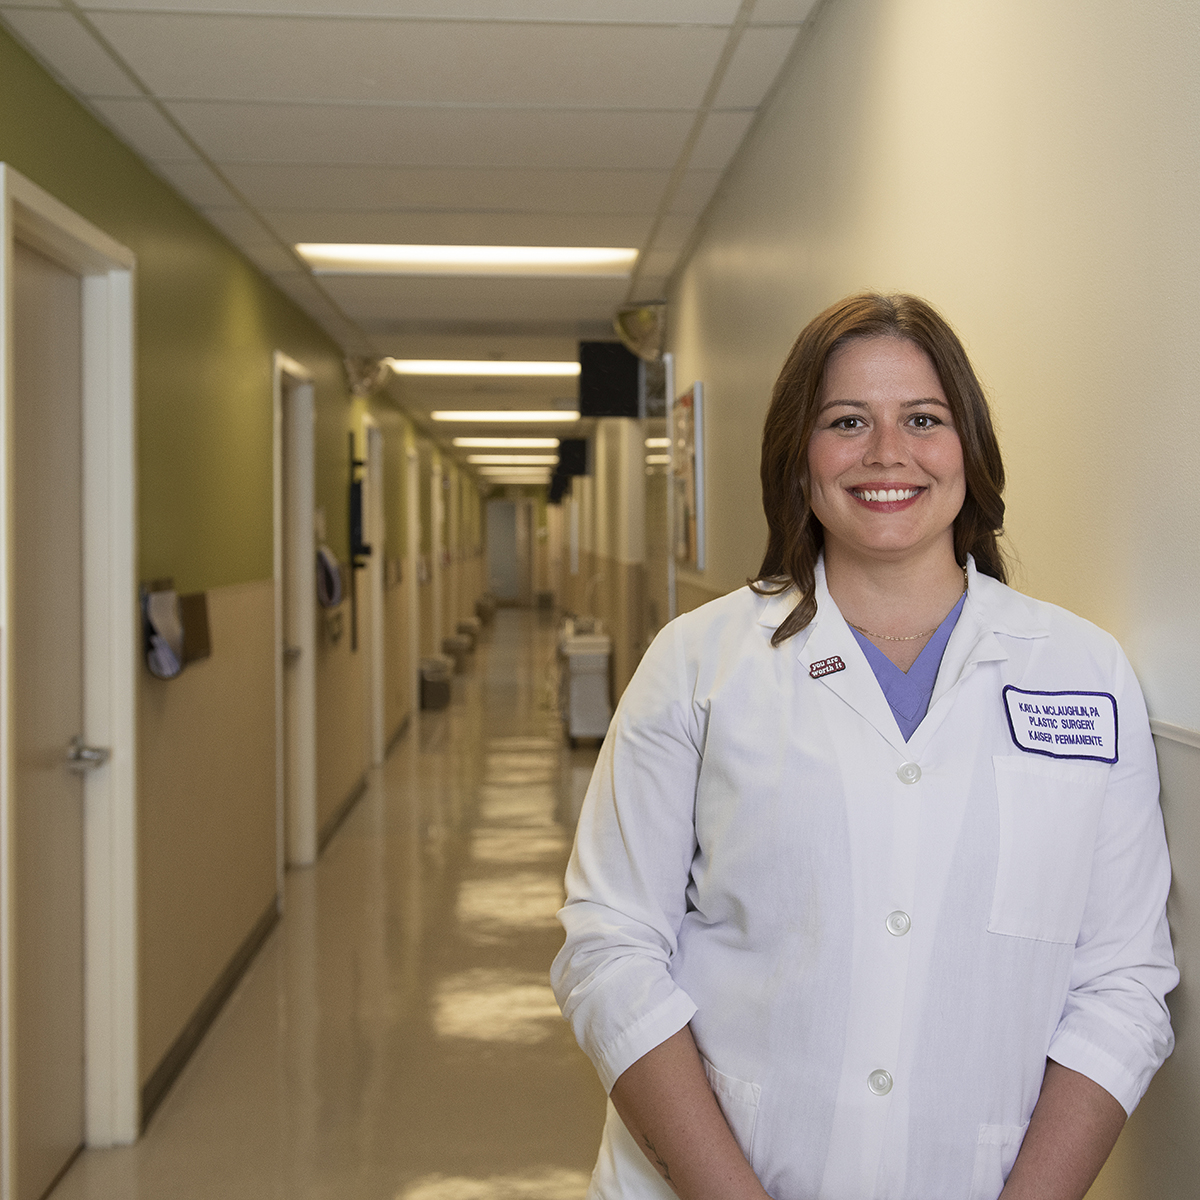 Photo of Kayla McLaughlin in a white smiling in a hospital corridor